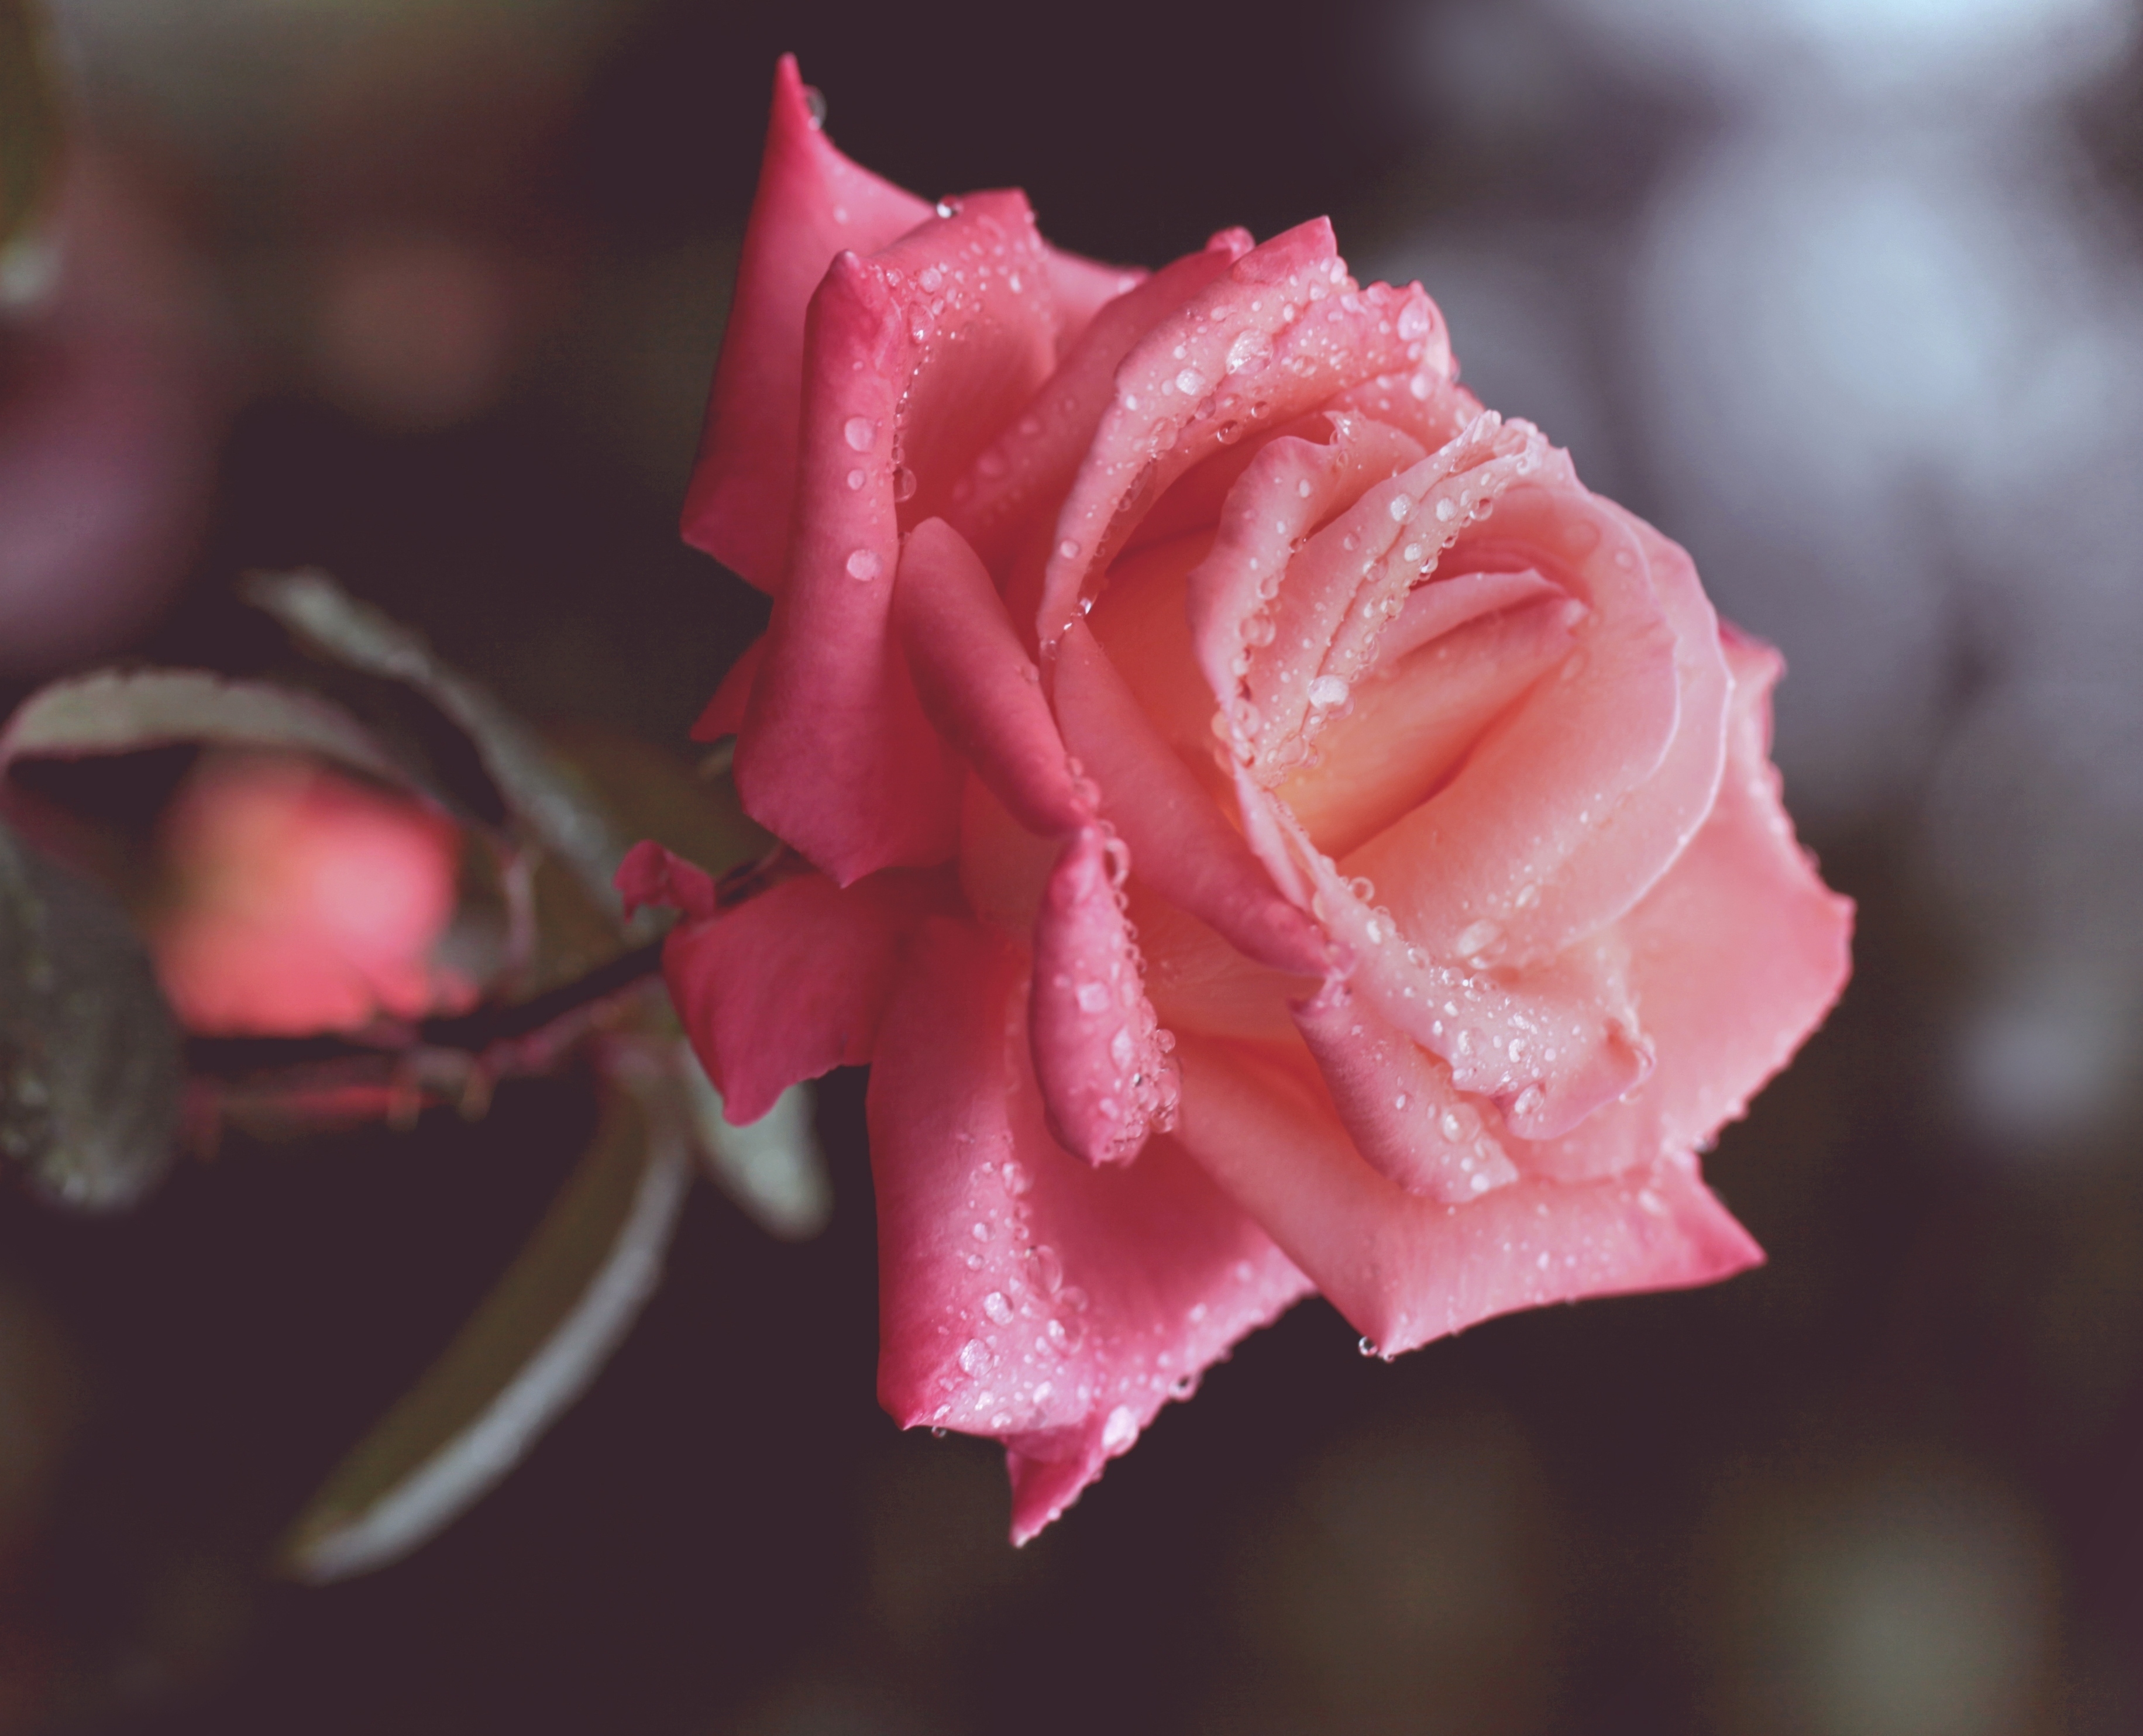 131528 download wallpaper rose flower, flowers, drops, rose, bud, close-up, stem, stalk screensavers and pictures for free